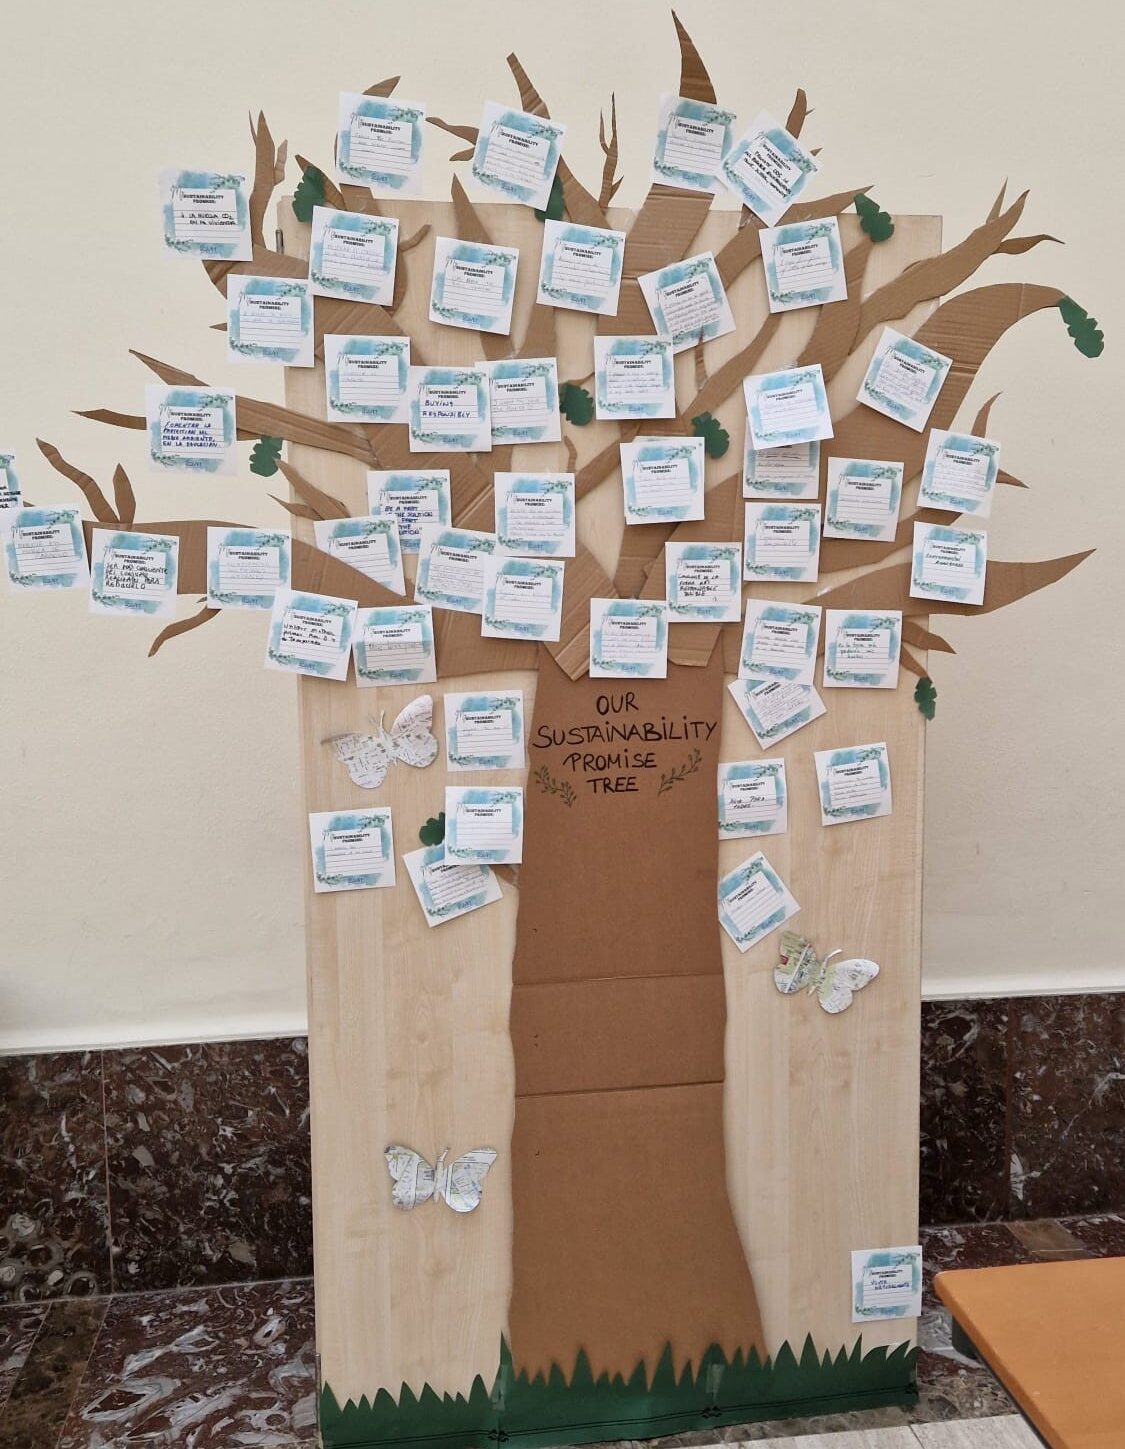 The G2VET Sustainable Promise Tree at the final conference in Valladolid, made by the G2VET Conference team: Annemarie Ohnoutka (BBRZ), Nicole Gassner (BBRZ), Madlen Kemper (SBH) with used office material